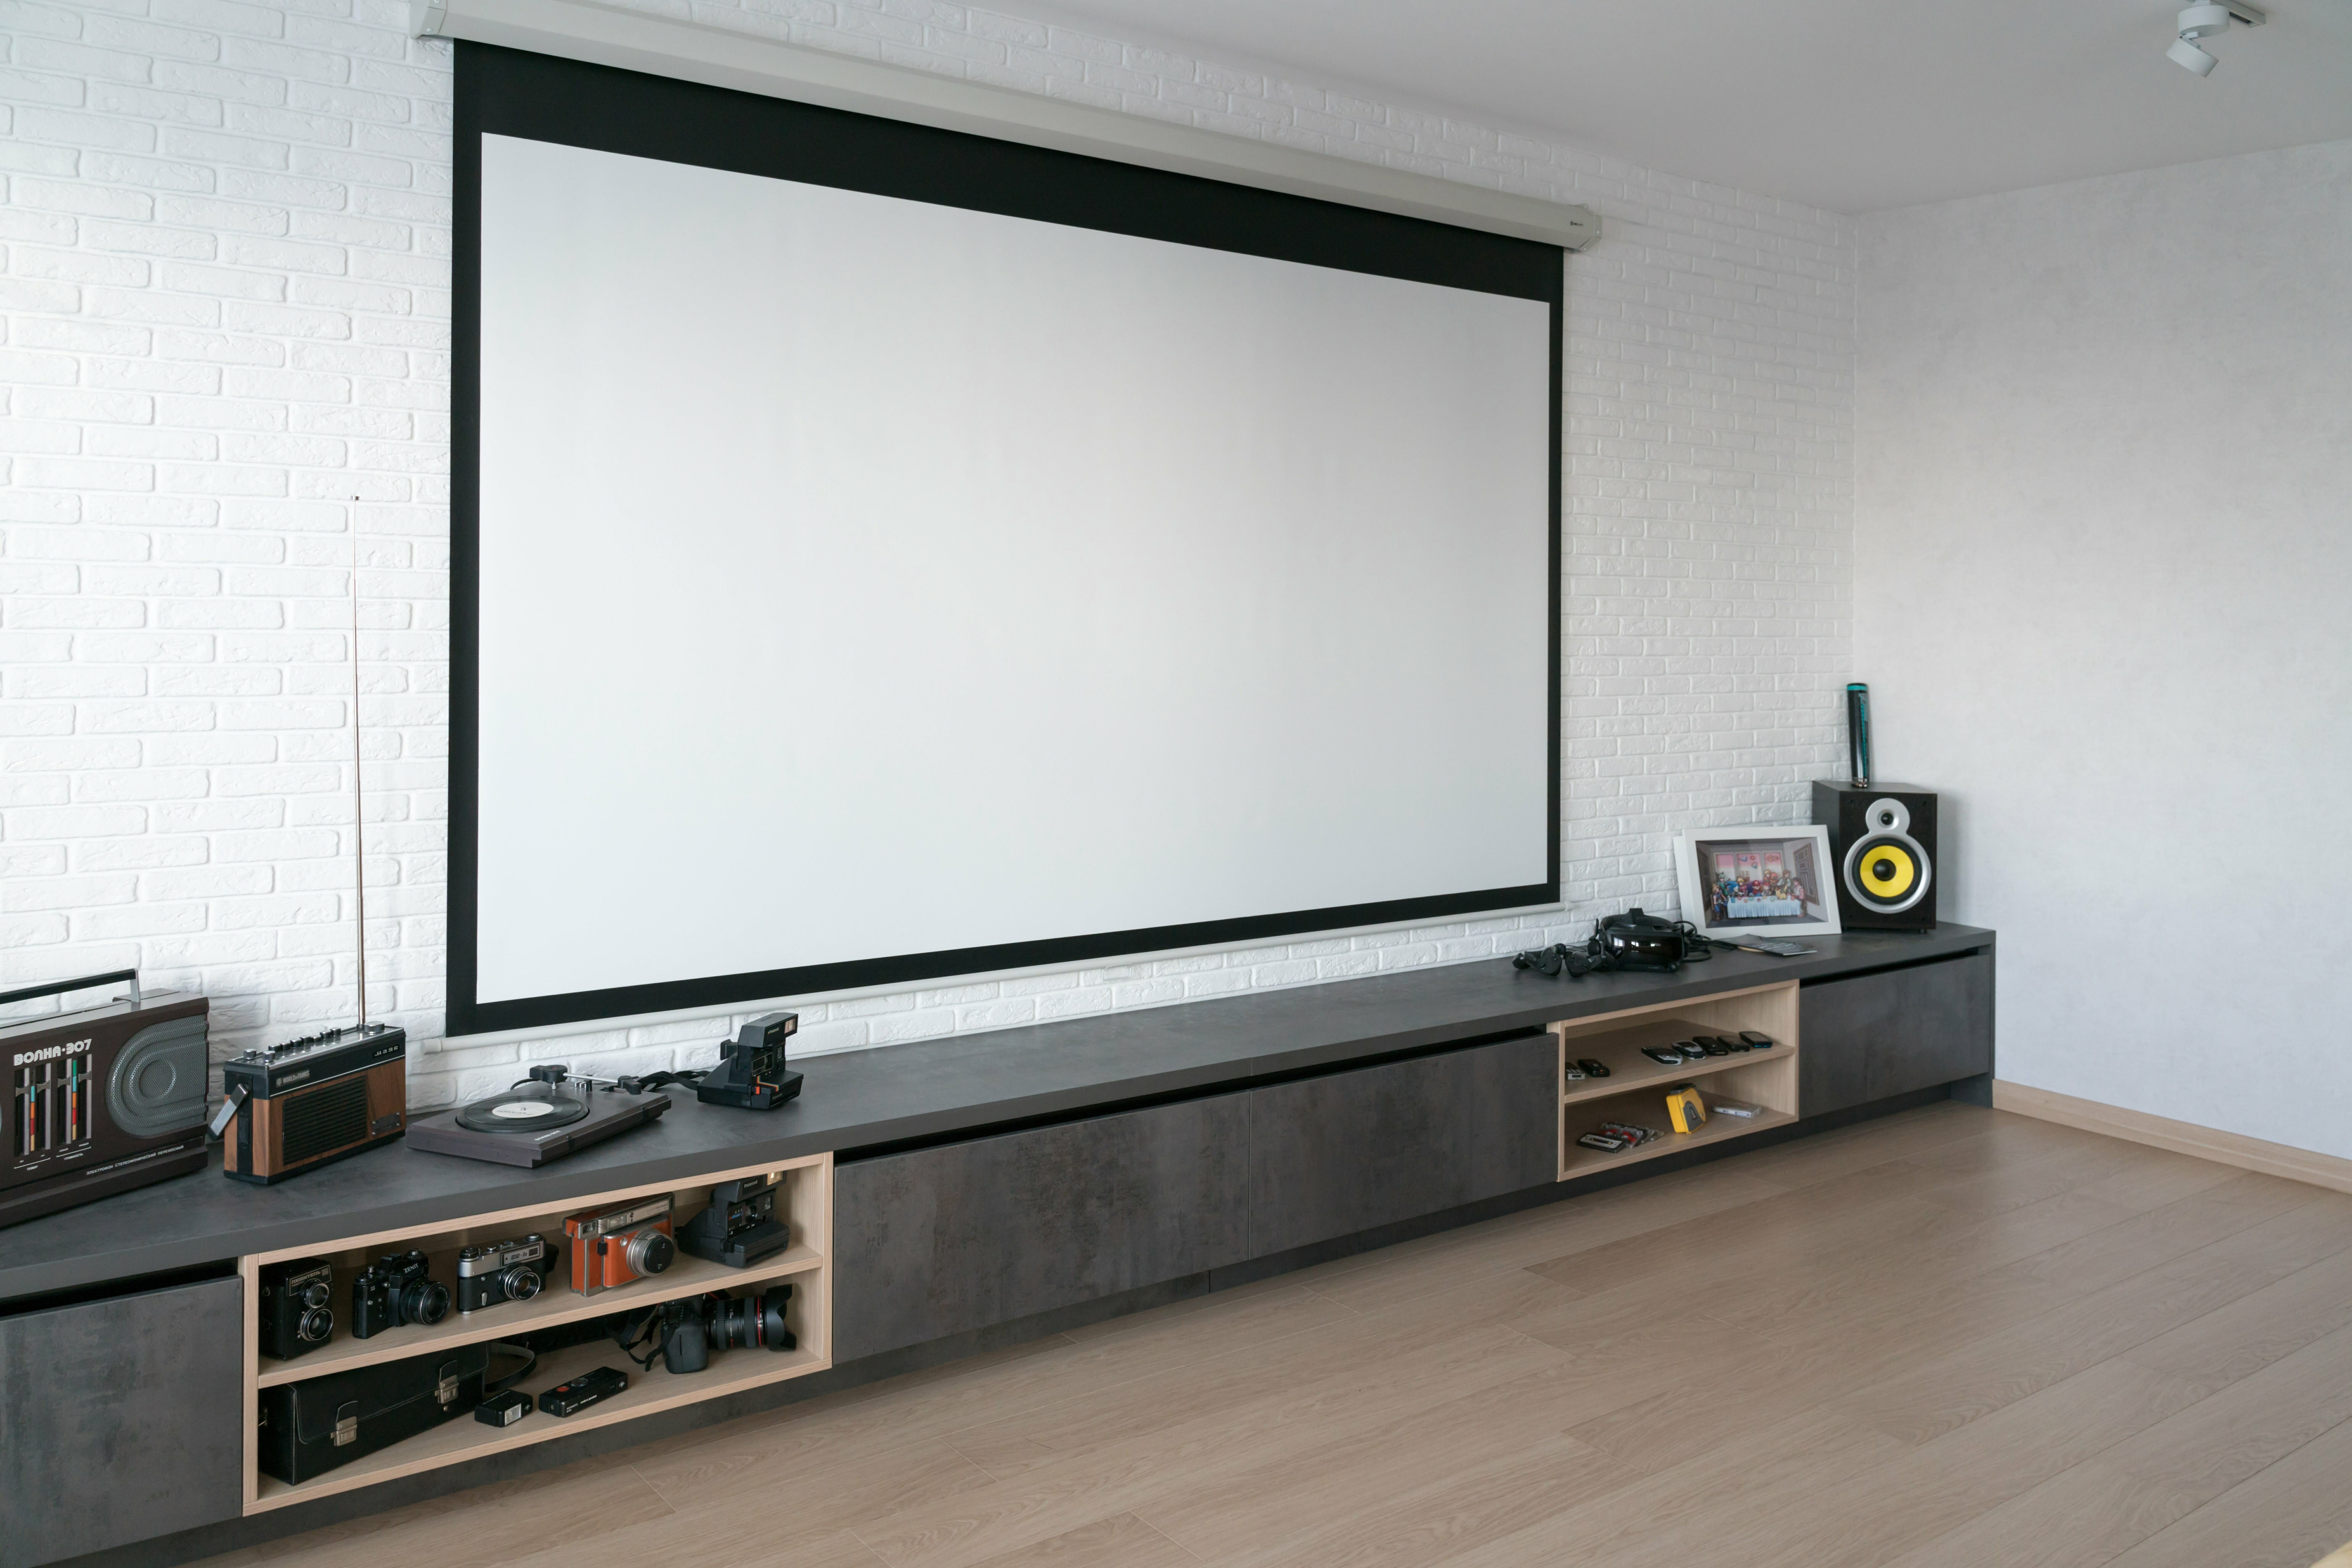 home theater system in living room with minimalist modern interior without people